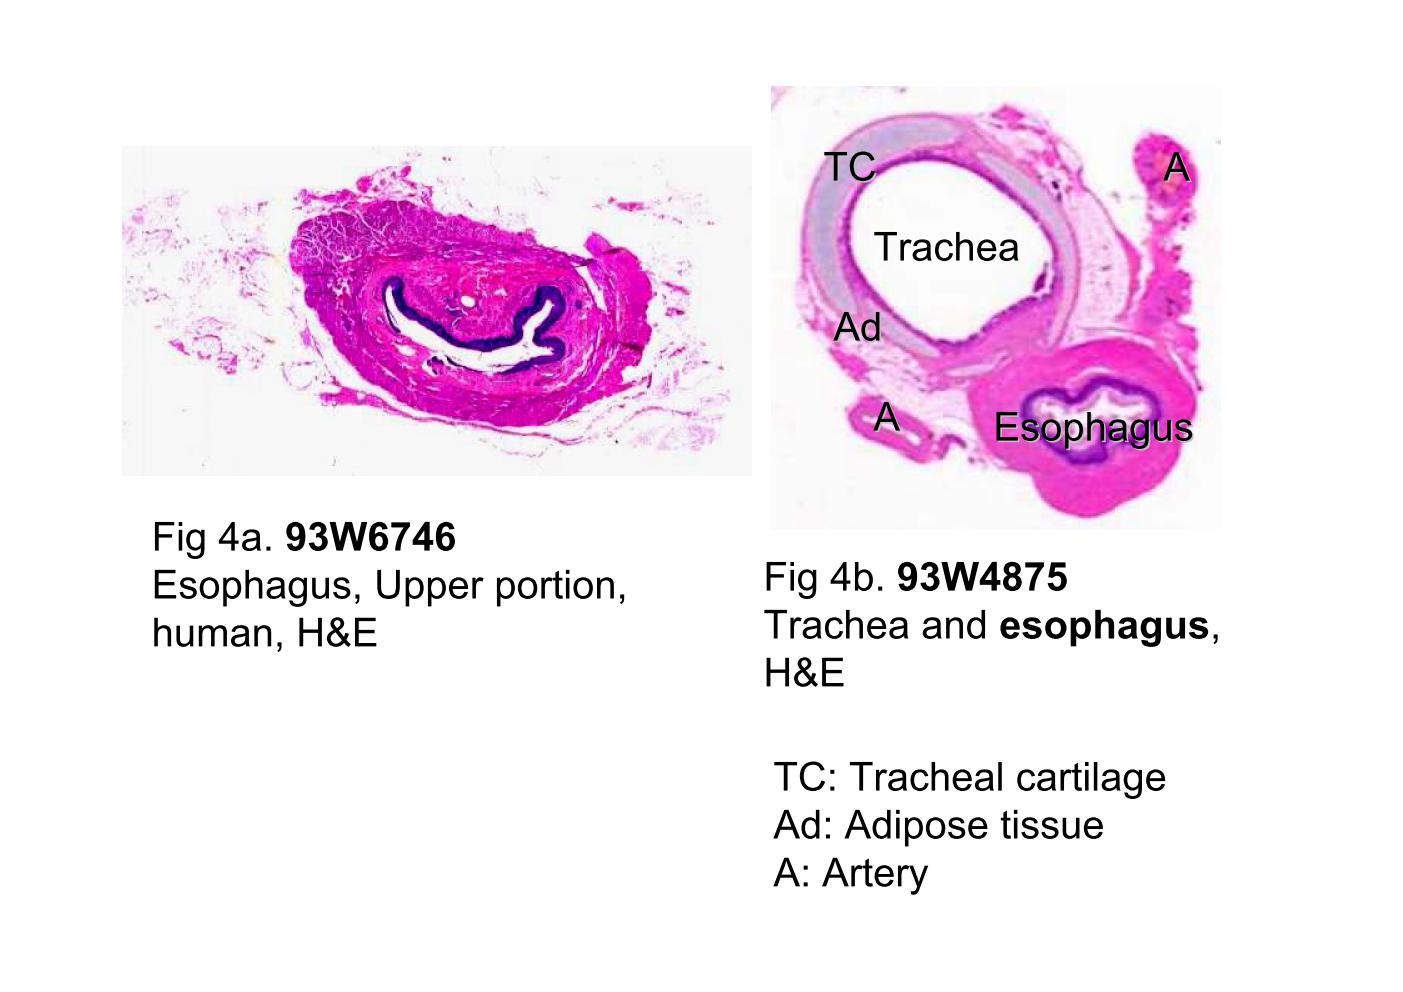 block10-1_11.jpg - Fig 4a. 93W6746 Esophagus, upper portion, human (cs) H&E.Fig 4b. 93W4875 Trachea and esophagus (cs) H&E.Both slides are taken from the upper portion of the esophagus.(Fig 4b shows the relationship between the trachea and theesophagus at the base of the neck.) All histological features ofthe upper portion of the esophagus are similar to its middleportion except the muscularis externa of the upper one third iscomposed of striated muscle. Please find similar structures in93W6748.